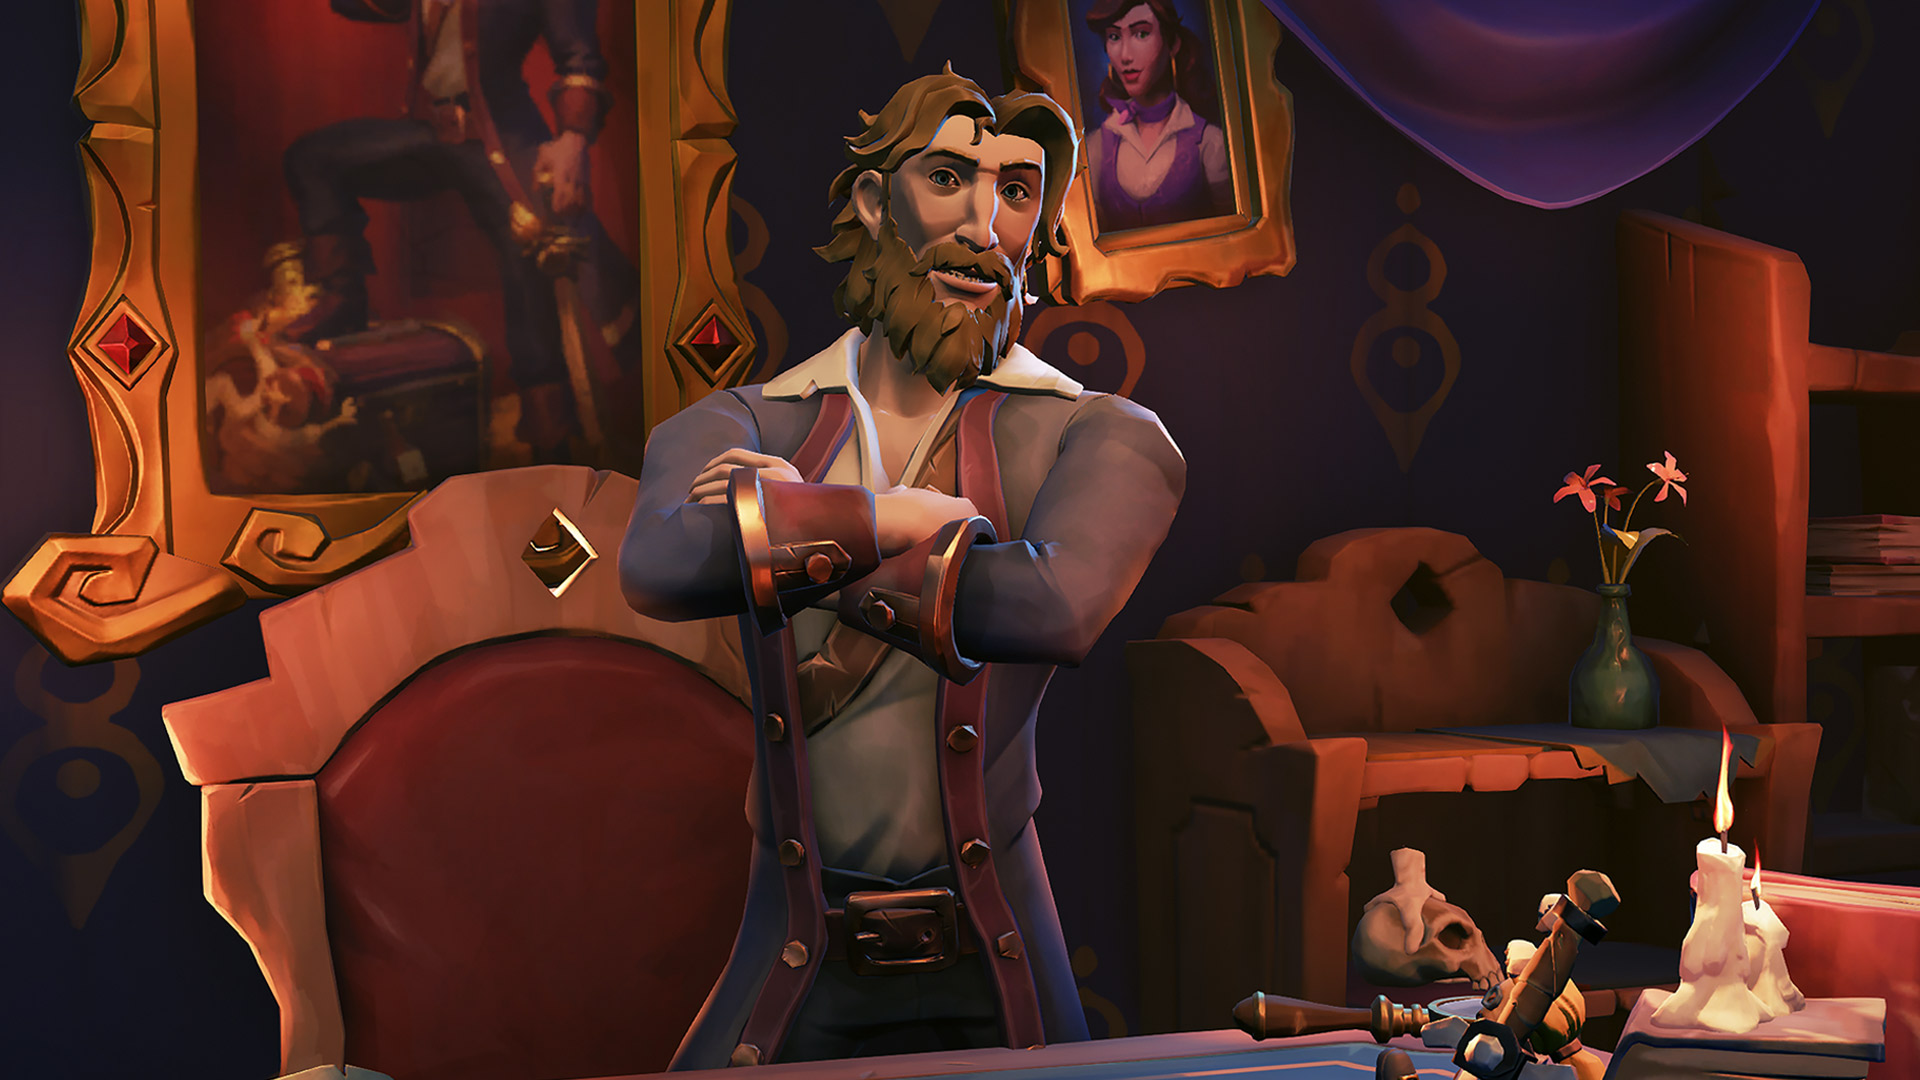 A gameplay screenshot from The Legend of Monkey Island and Sea of Thieves